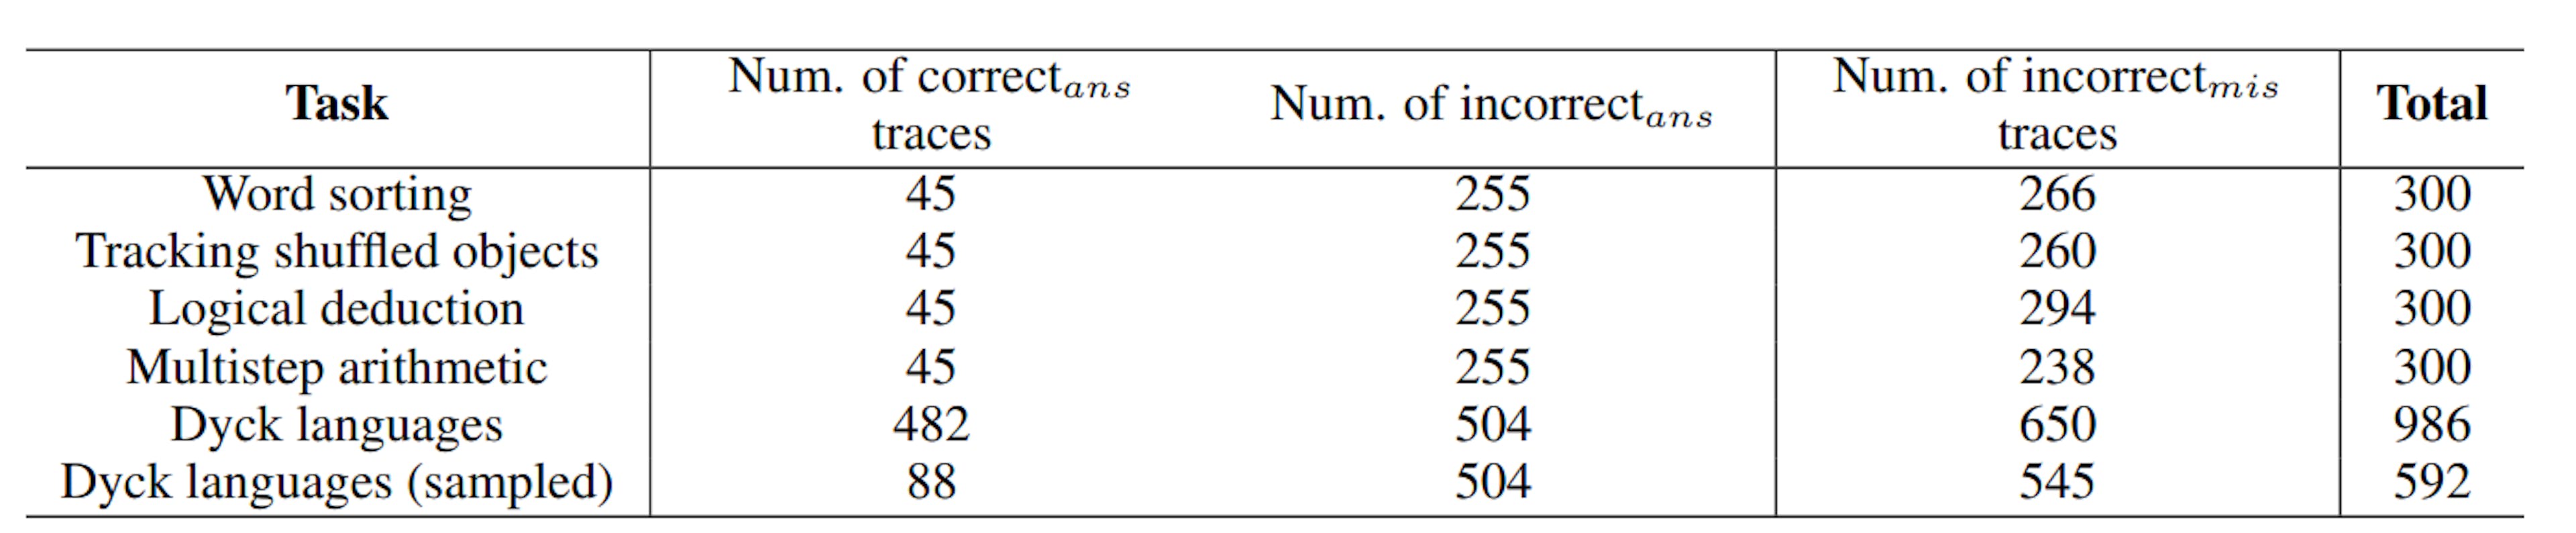 Table 3: Breakdown of correctness and mistake distribution in our dataset. Correctnessans is based on exact matching. Dyck languages (sampled) refers to the set of traces which have been sampled so that the the ratio of correctans to incorrectans traces matches the other tasks.